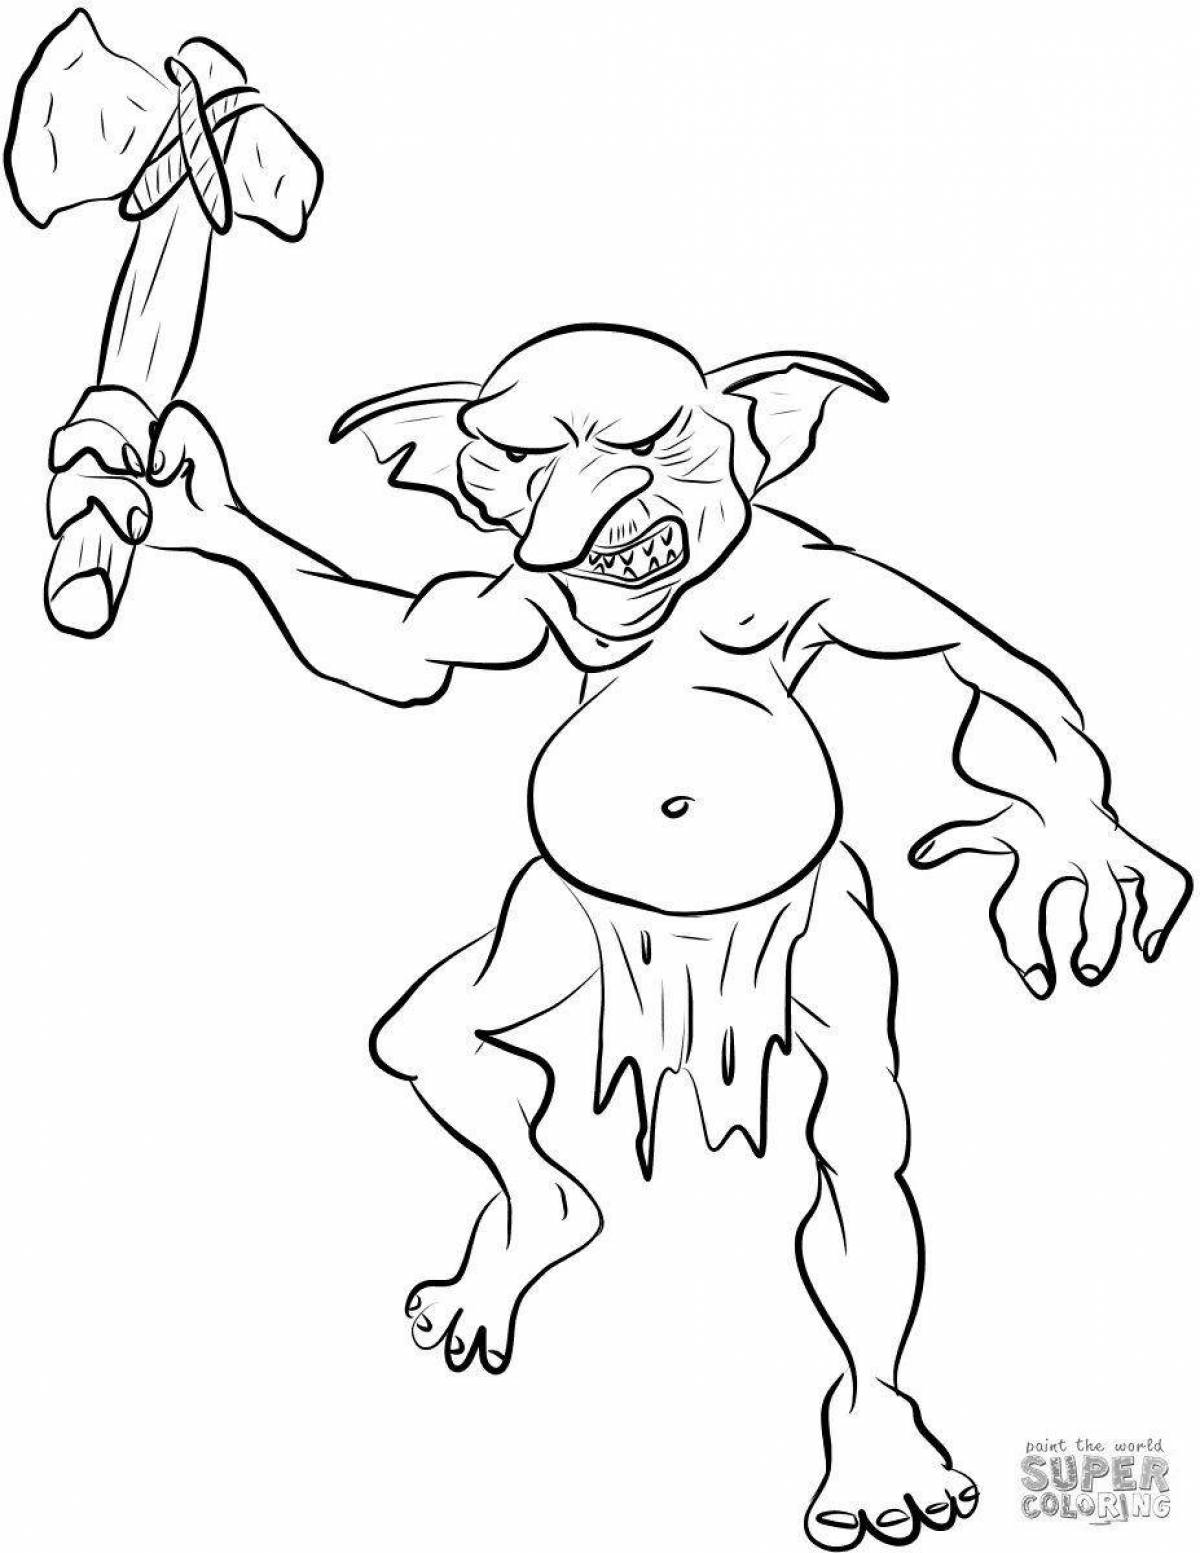 Amazing goblin coloring book for kids